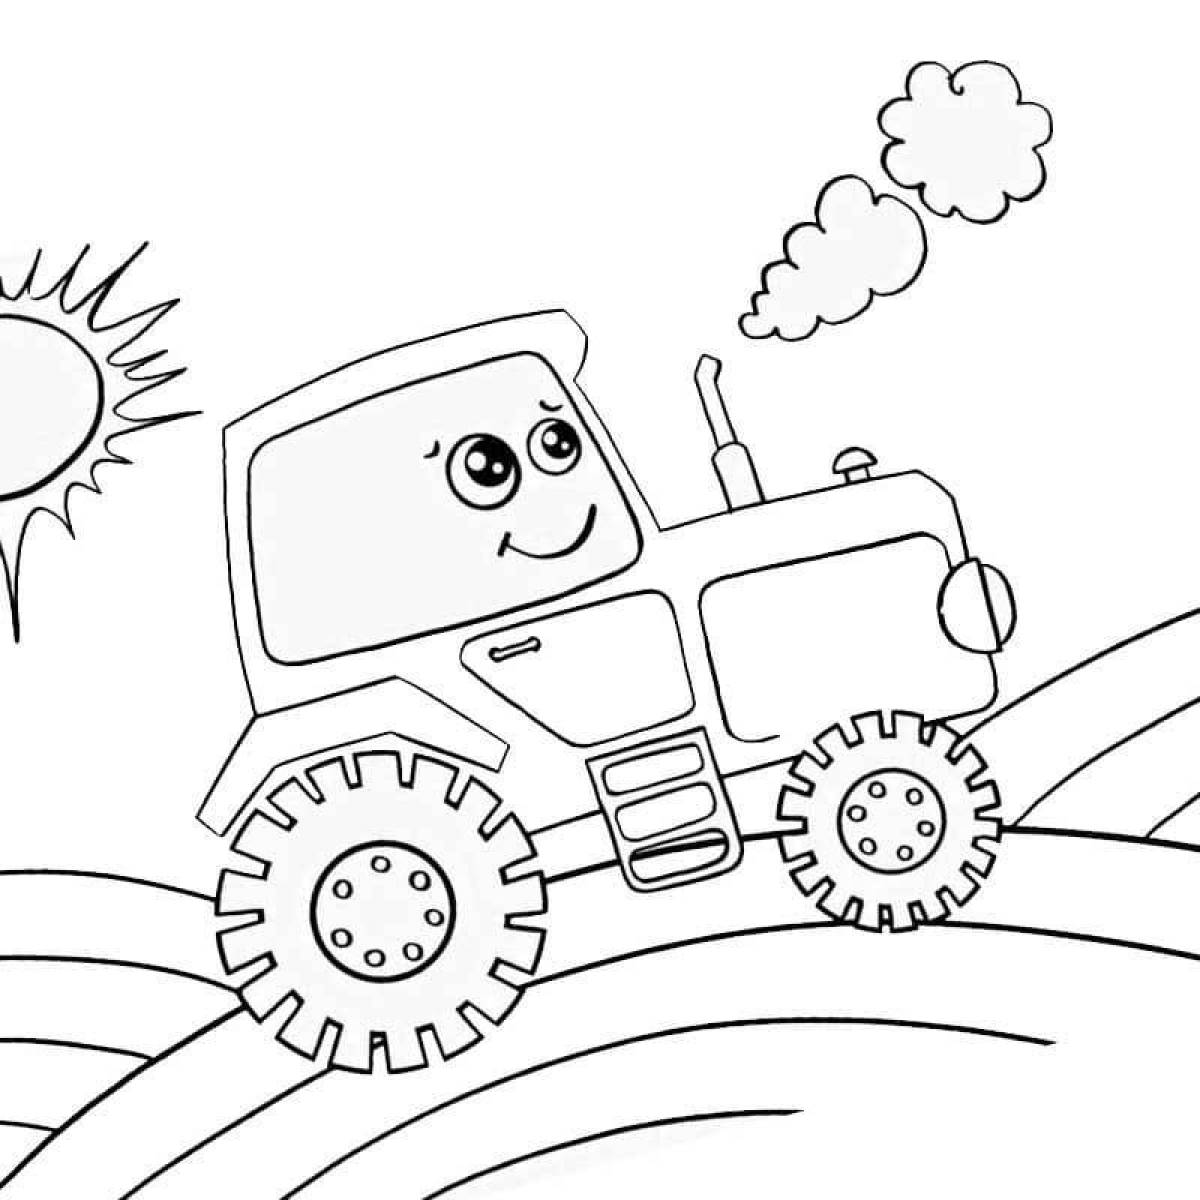 Awesome blue tractor coloring book for preschoolers